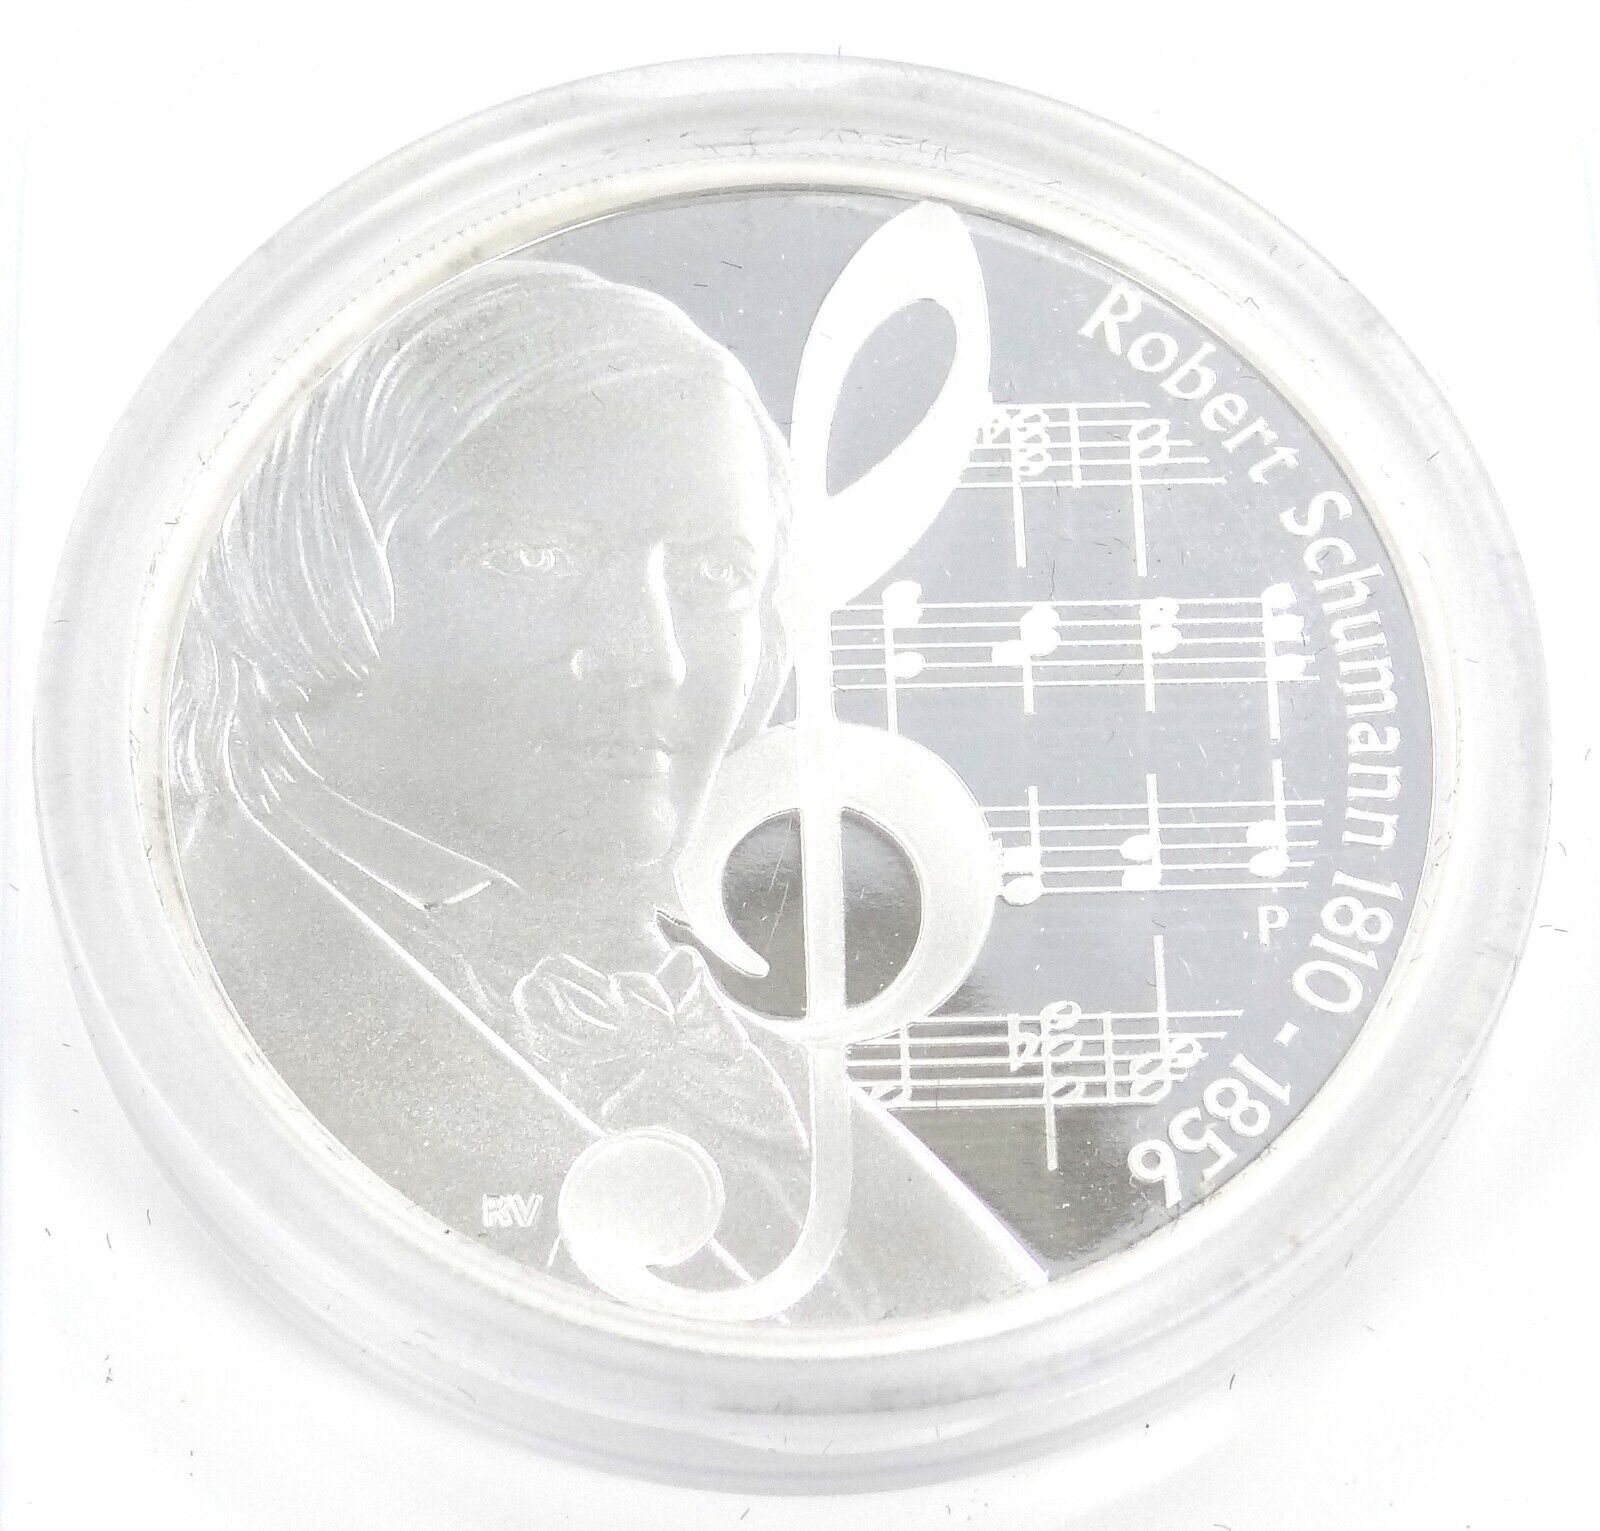 1 Oz Silver Coin 2010 $1 Tuvalu Great Composers Robert Shumann 1810-1856 Proof-classypw.com-1